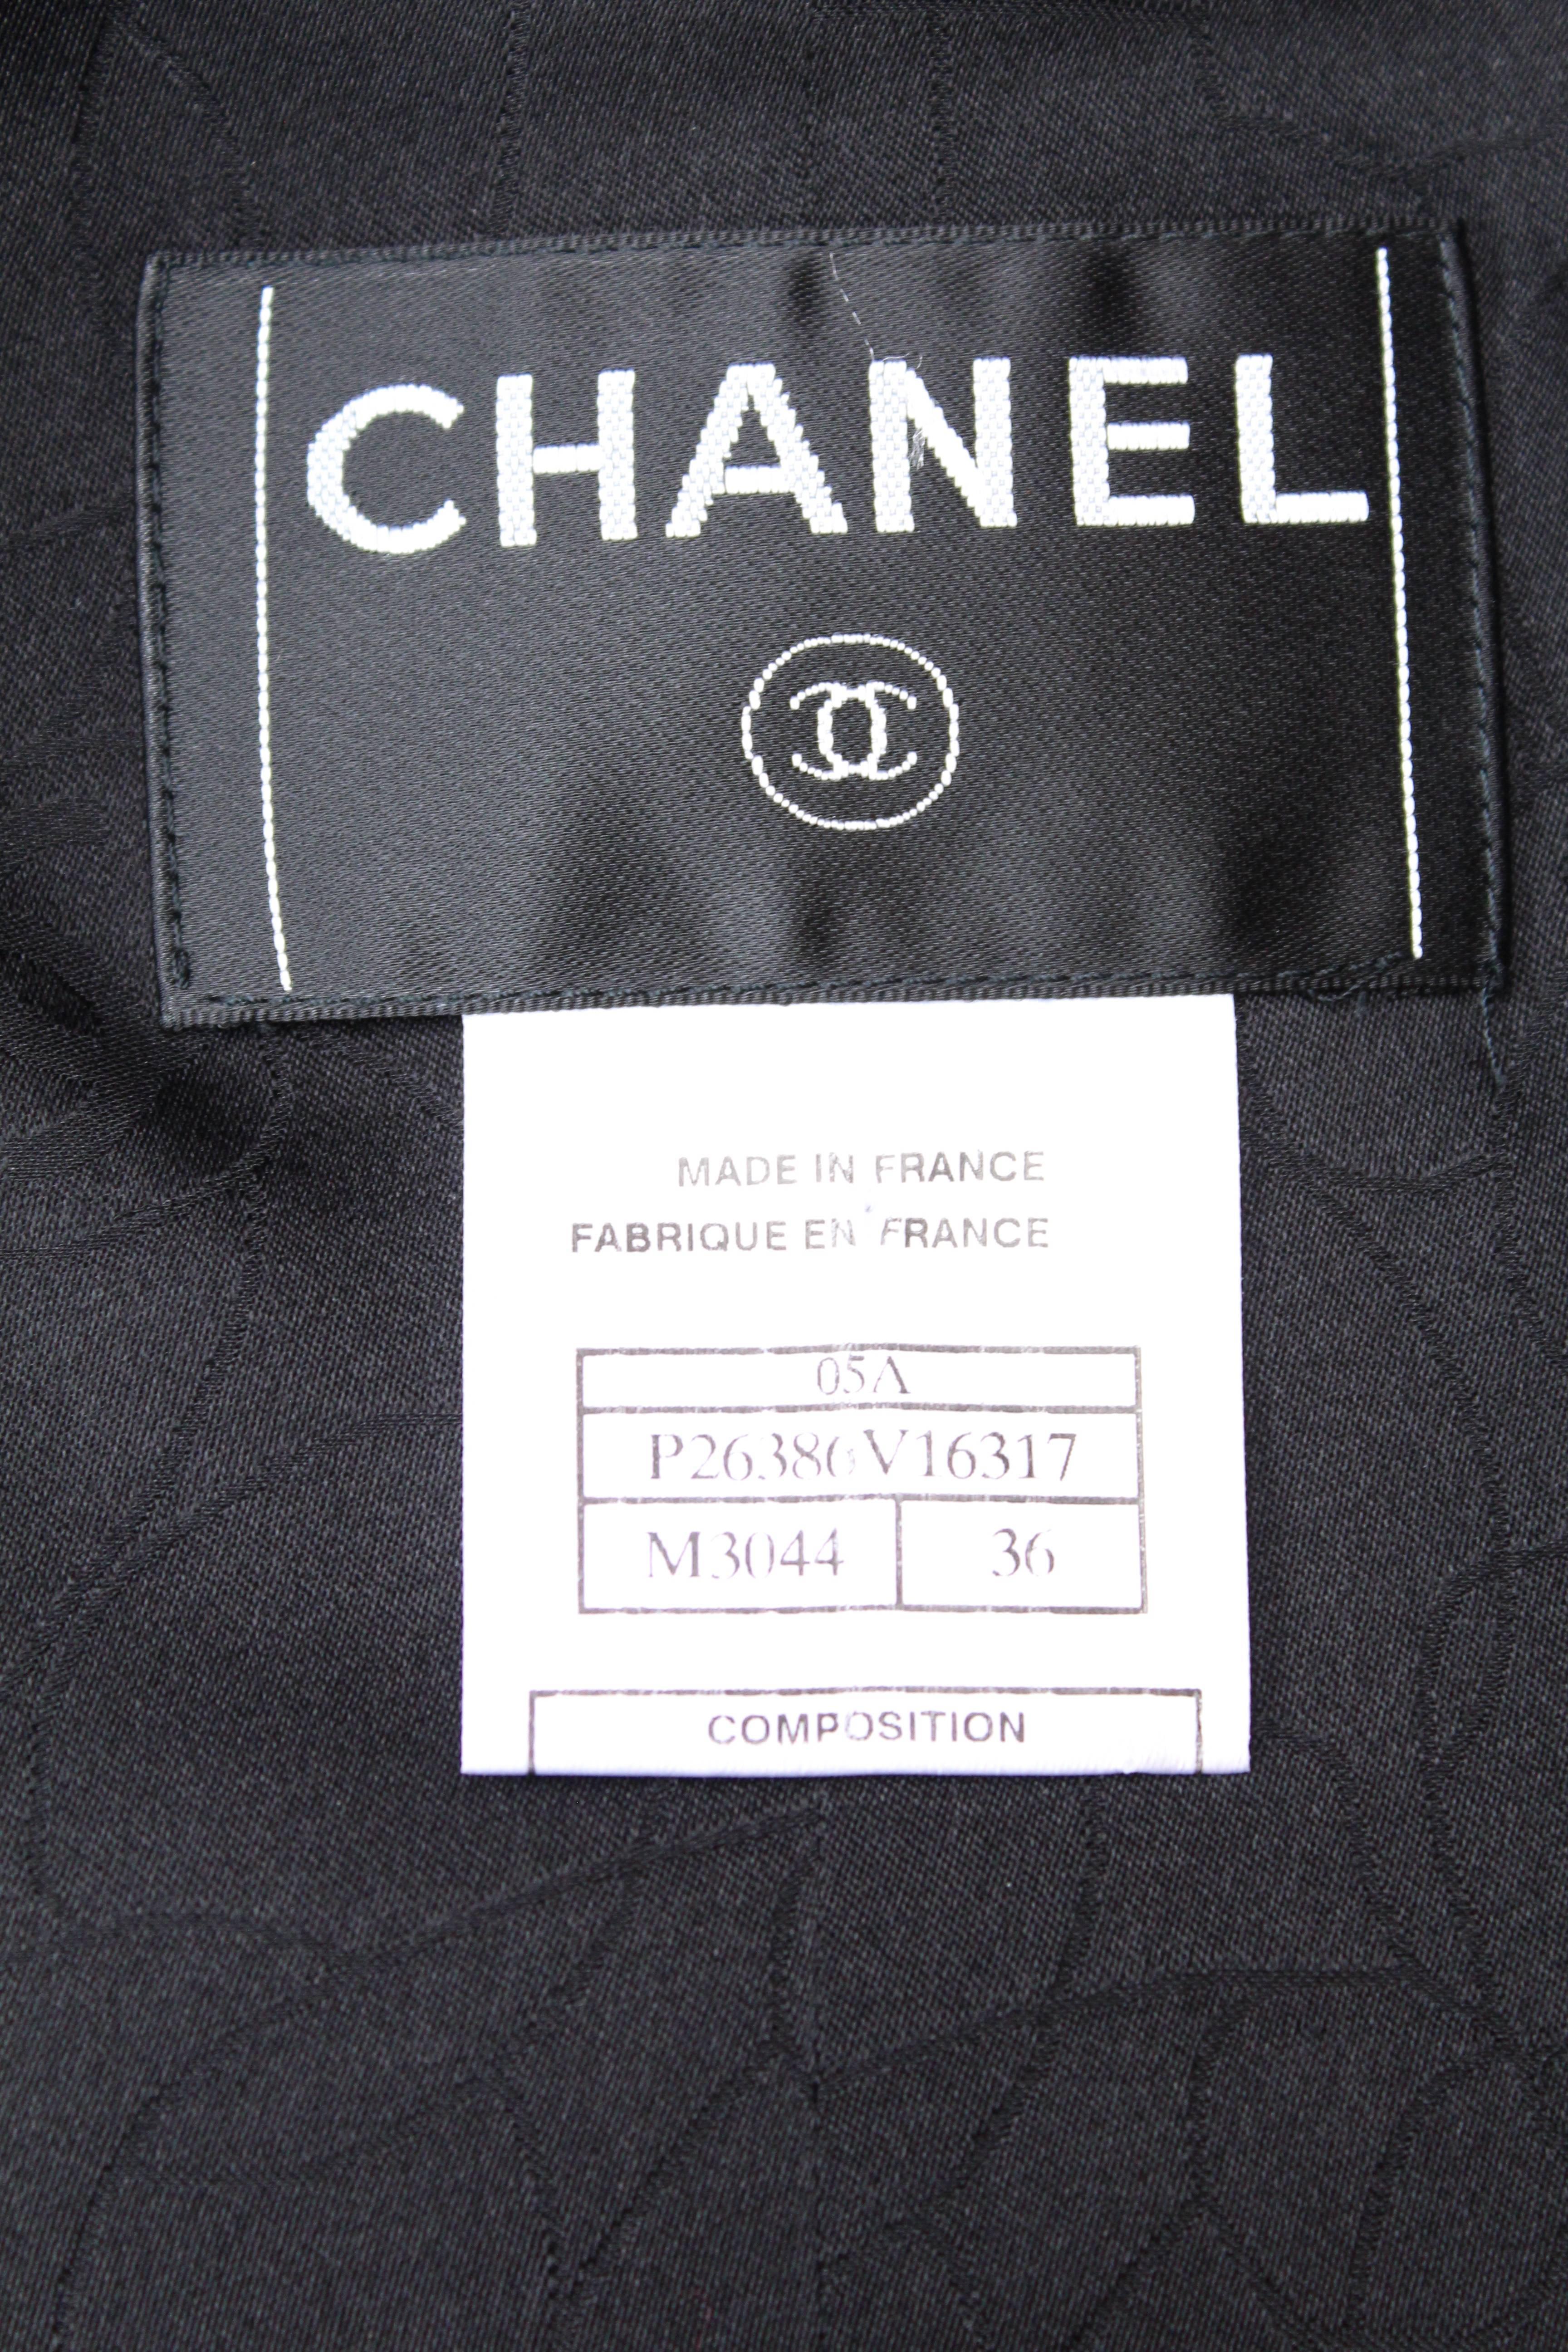 2005 Chanel Black and White Tweed Jacket 6